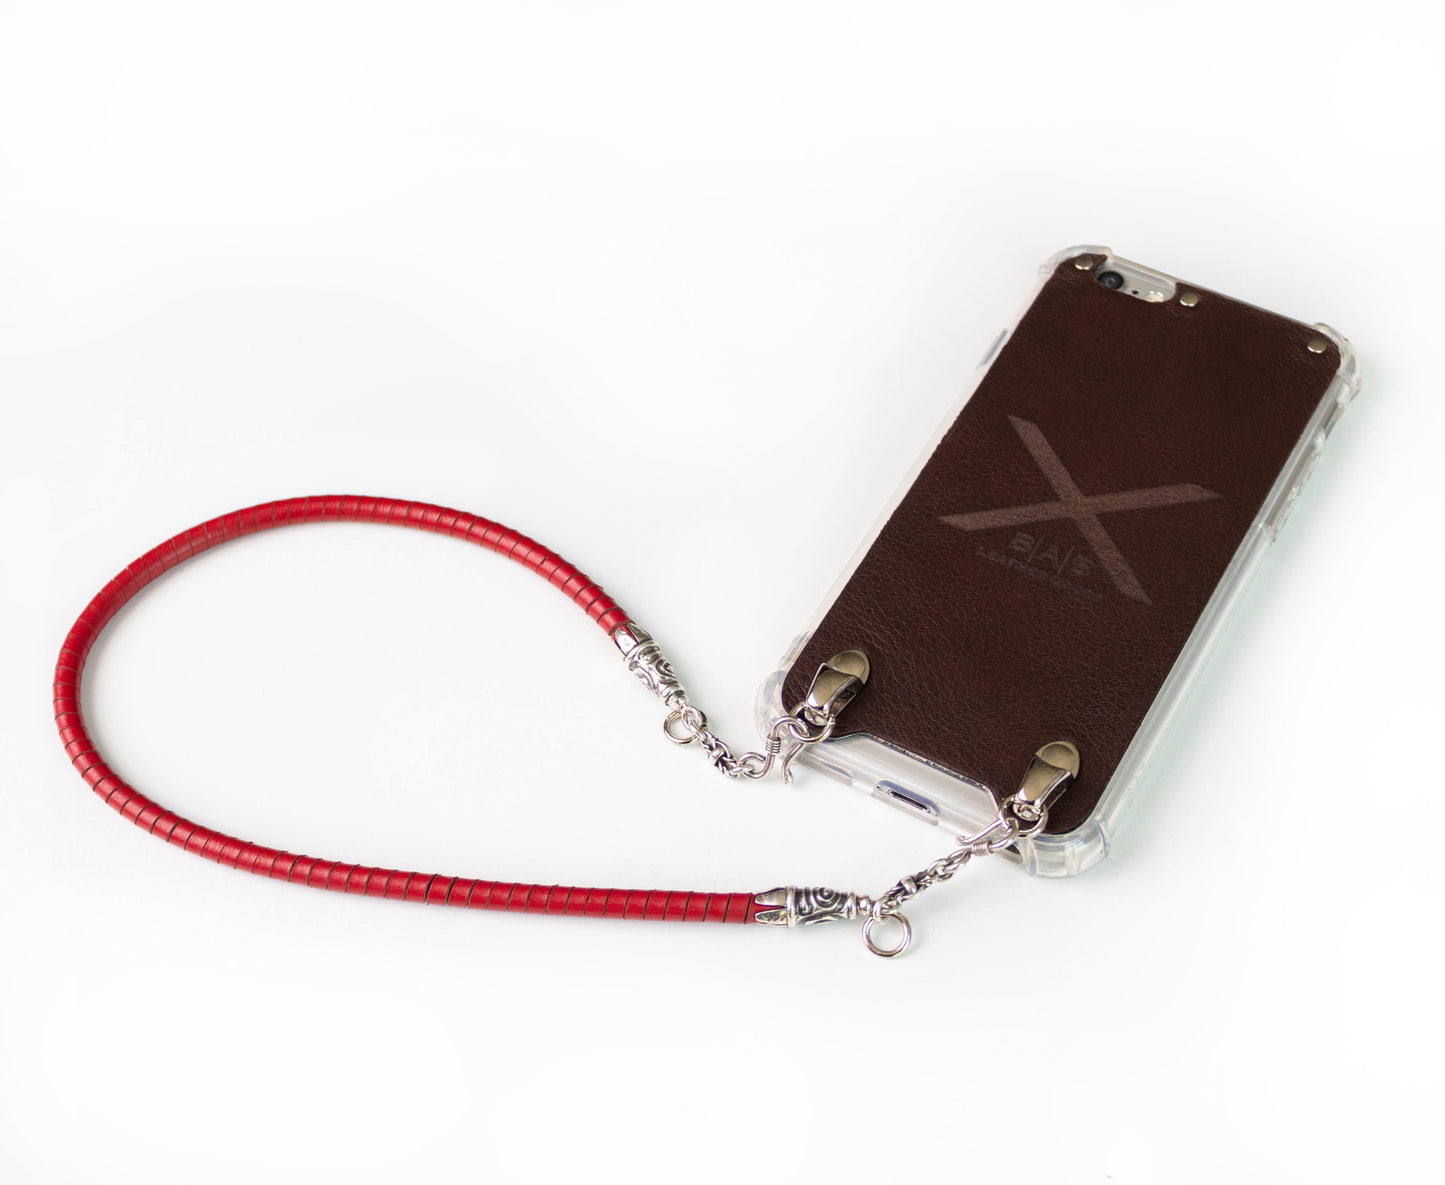 Full-Grain vegetable-tanned Genuine Leather & 925 Sterling Silver Case for iPhone. Hand-braided Red Spiral Genuine Leather Bracelet/Choker/Strap.- F01